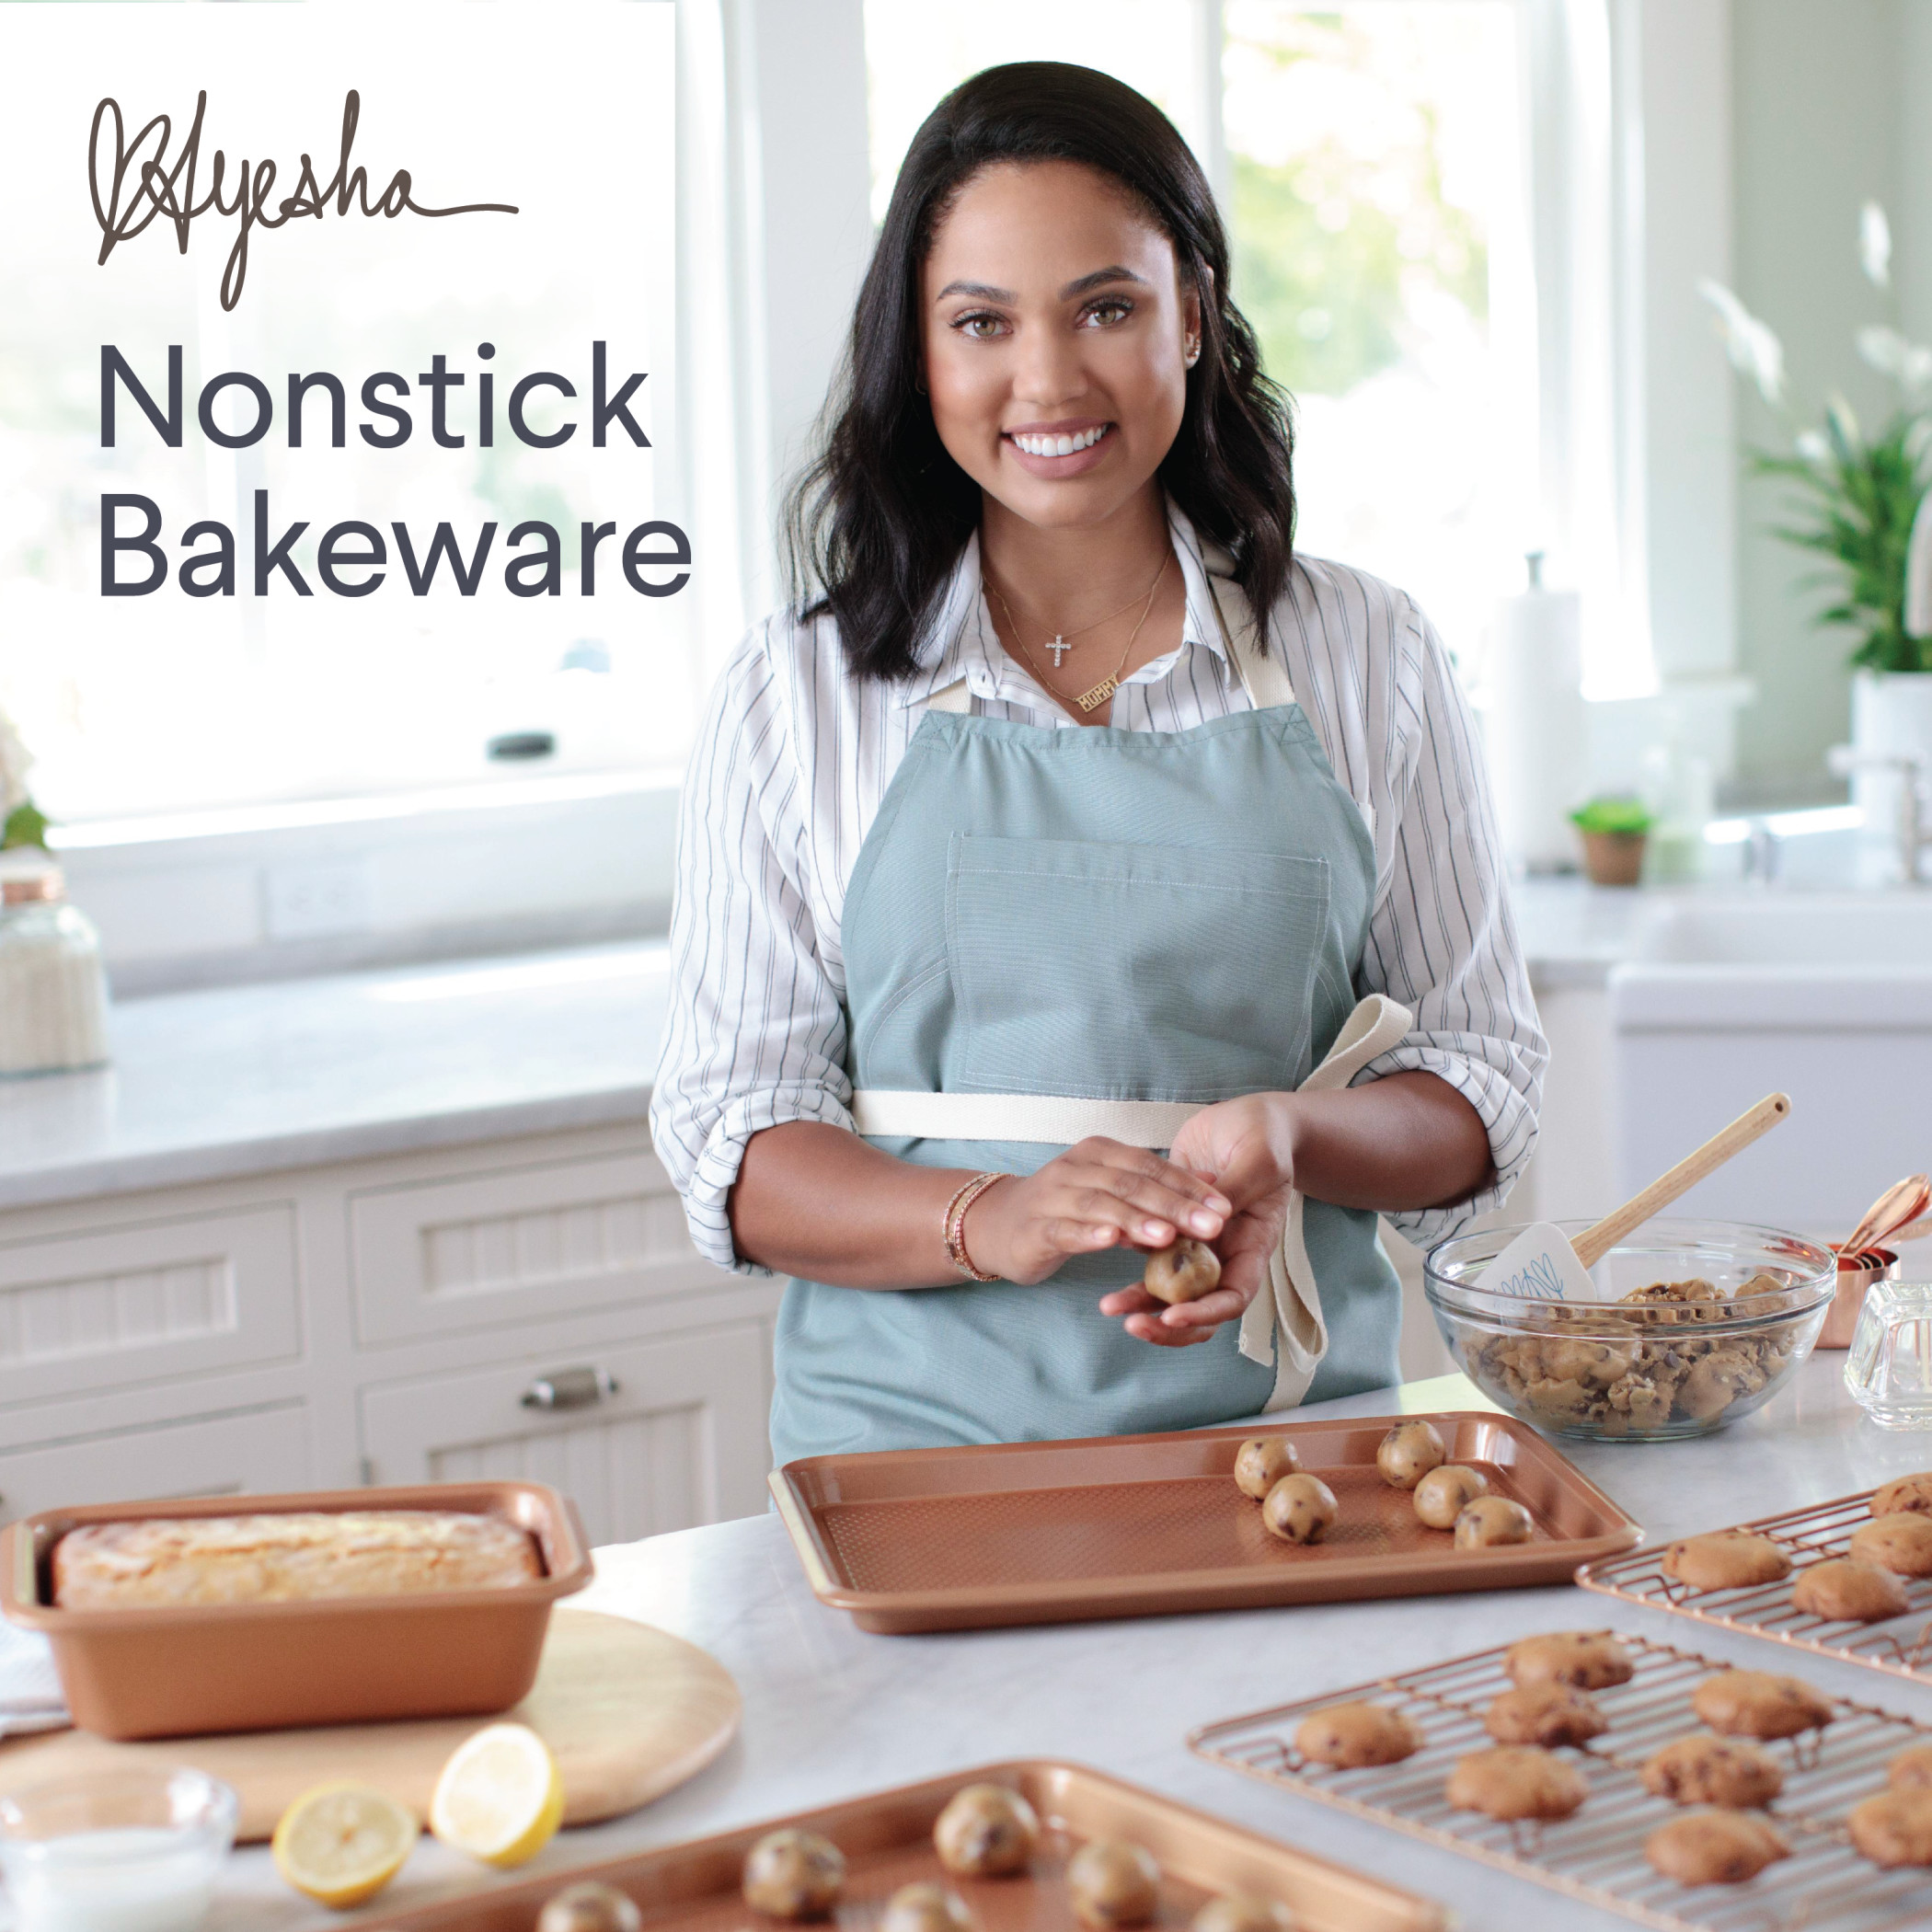 Ayesha Curry 4-Piece Bakeware Toaster Oven Baking Set, Copper - image 2 of 11